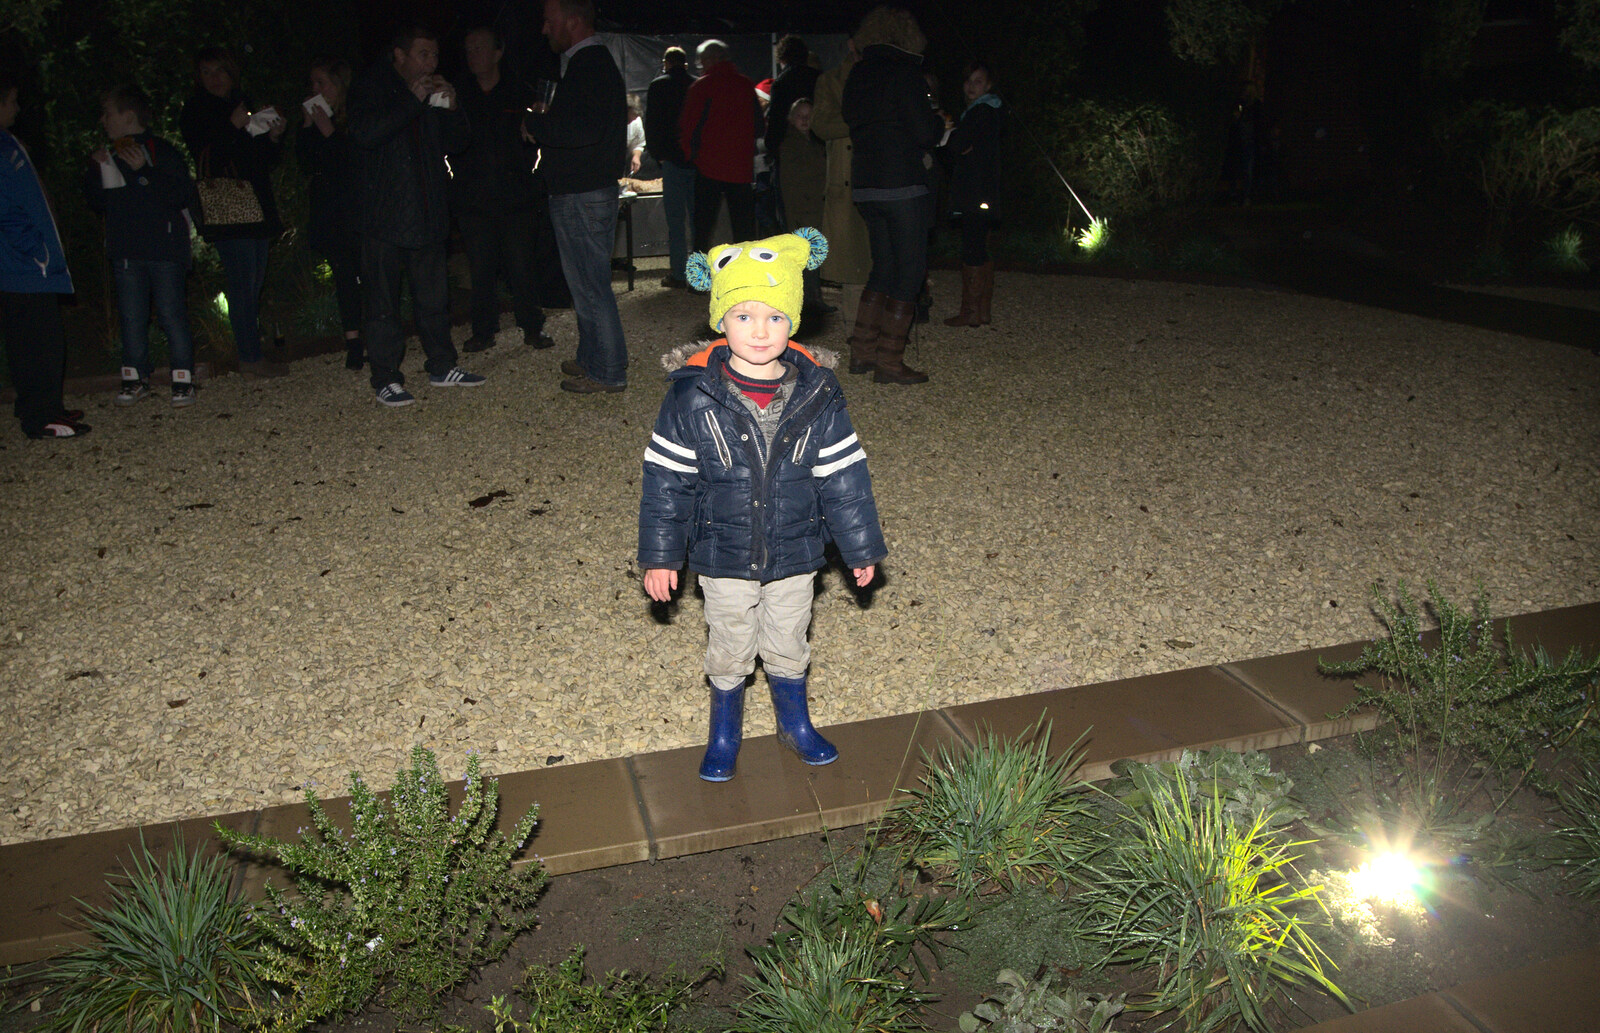 Harry with a hat on from Rick Wakeman, Ian Lavender and the Christmas lights, The Oaksmere, Suffolk - 4th December 2014